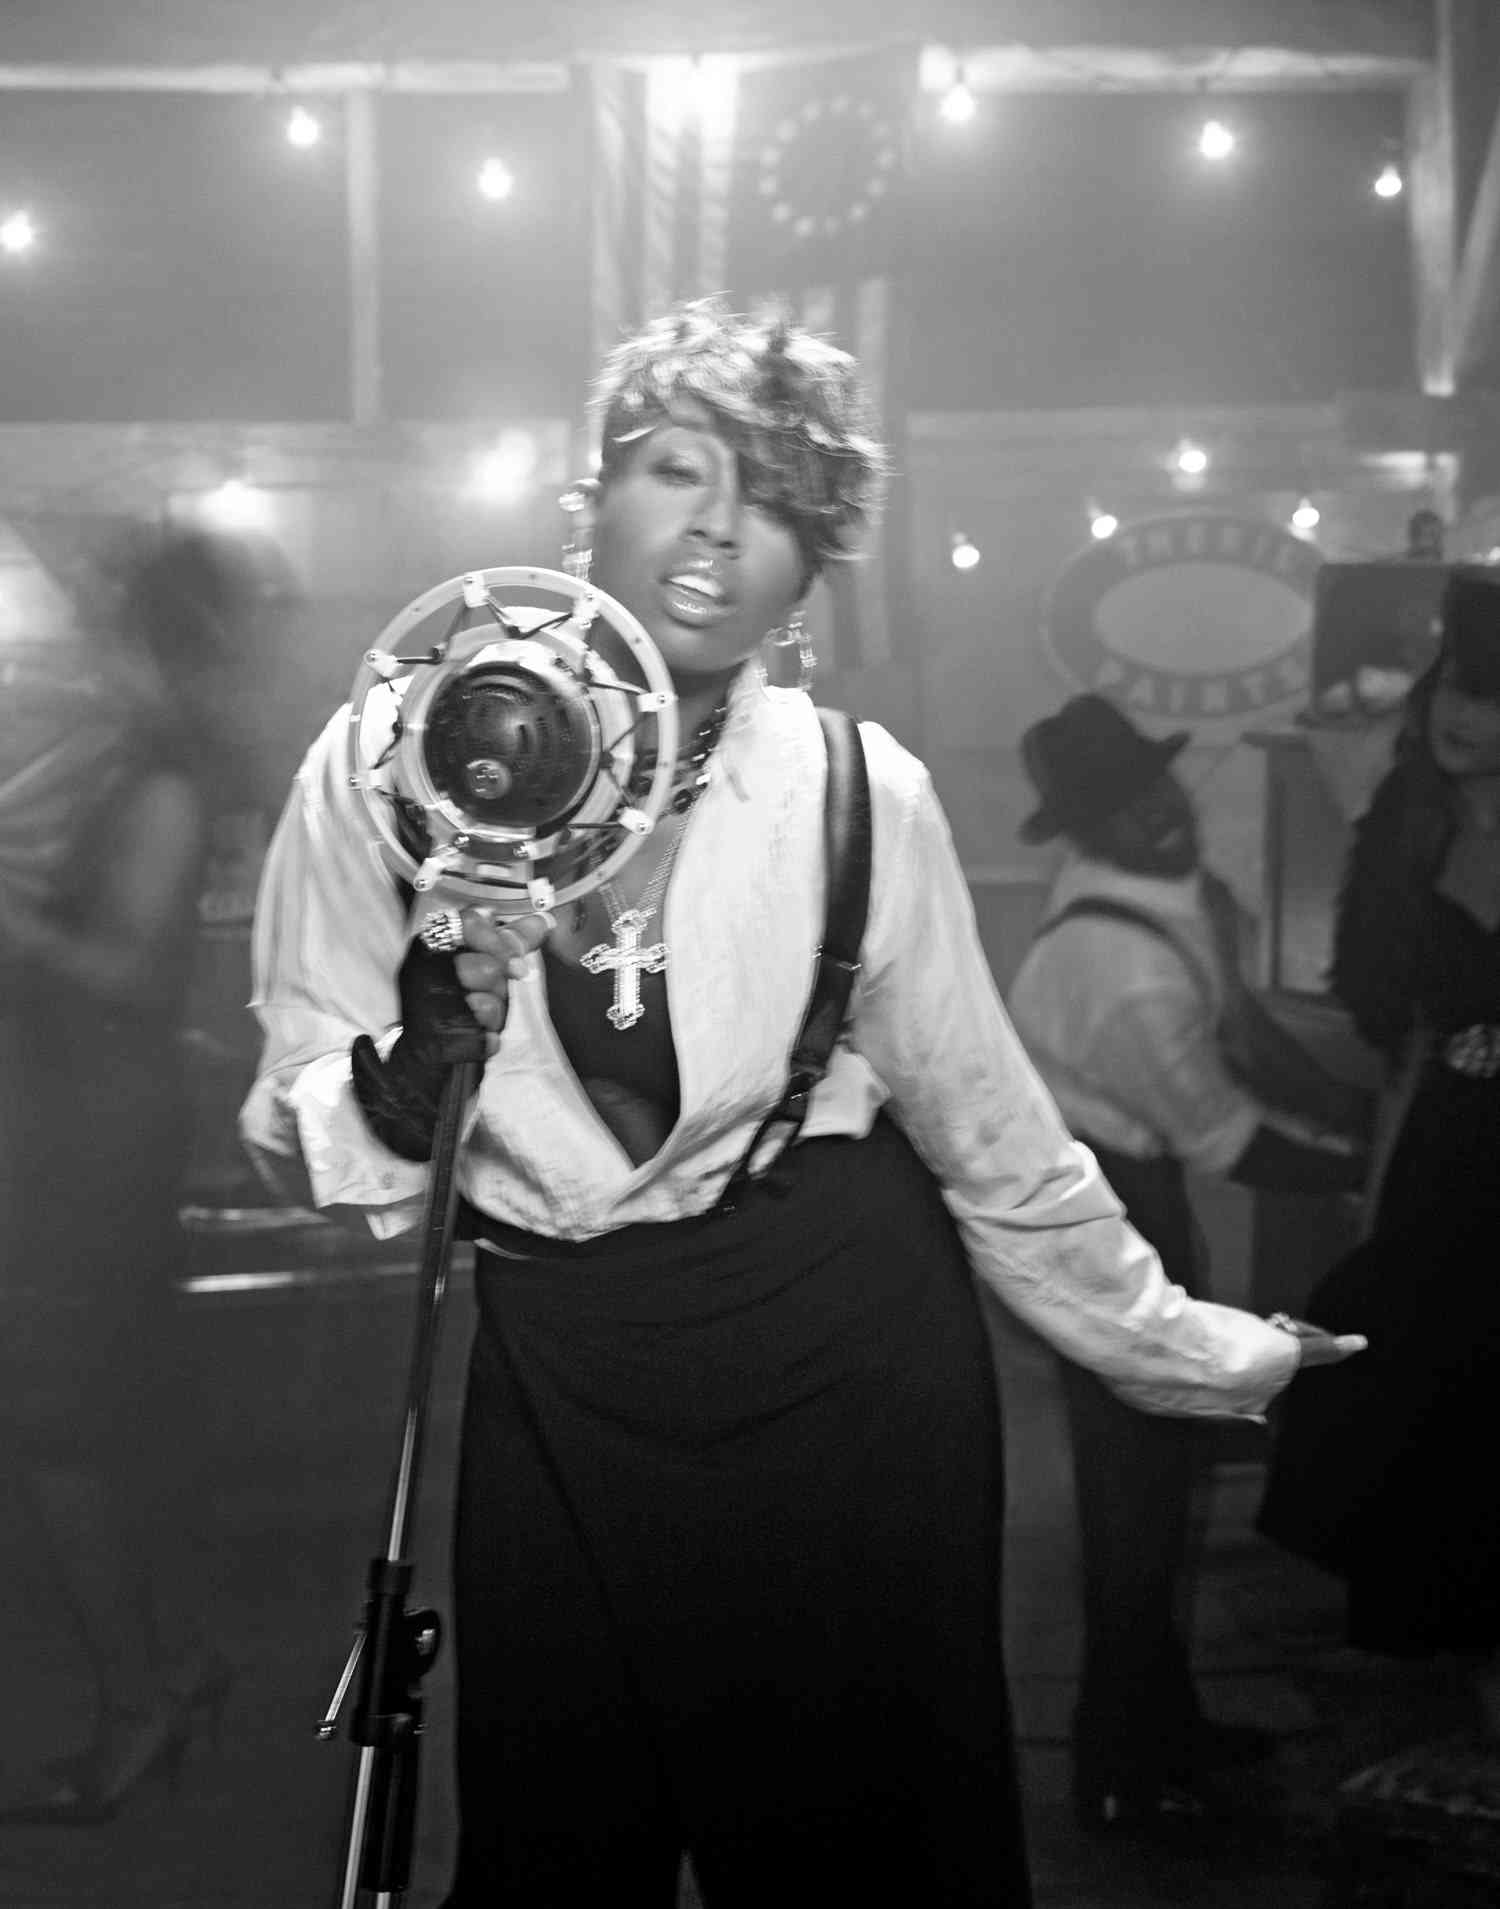 Iconic Image of missy elliott albums/songs cover shot by Warwick Saint